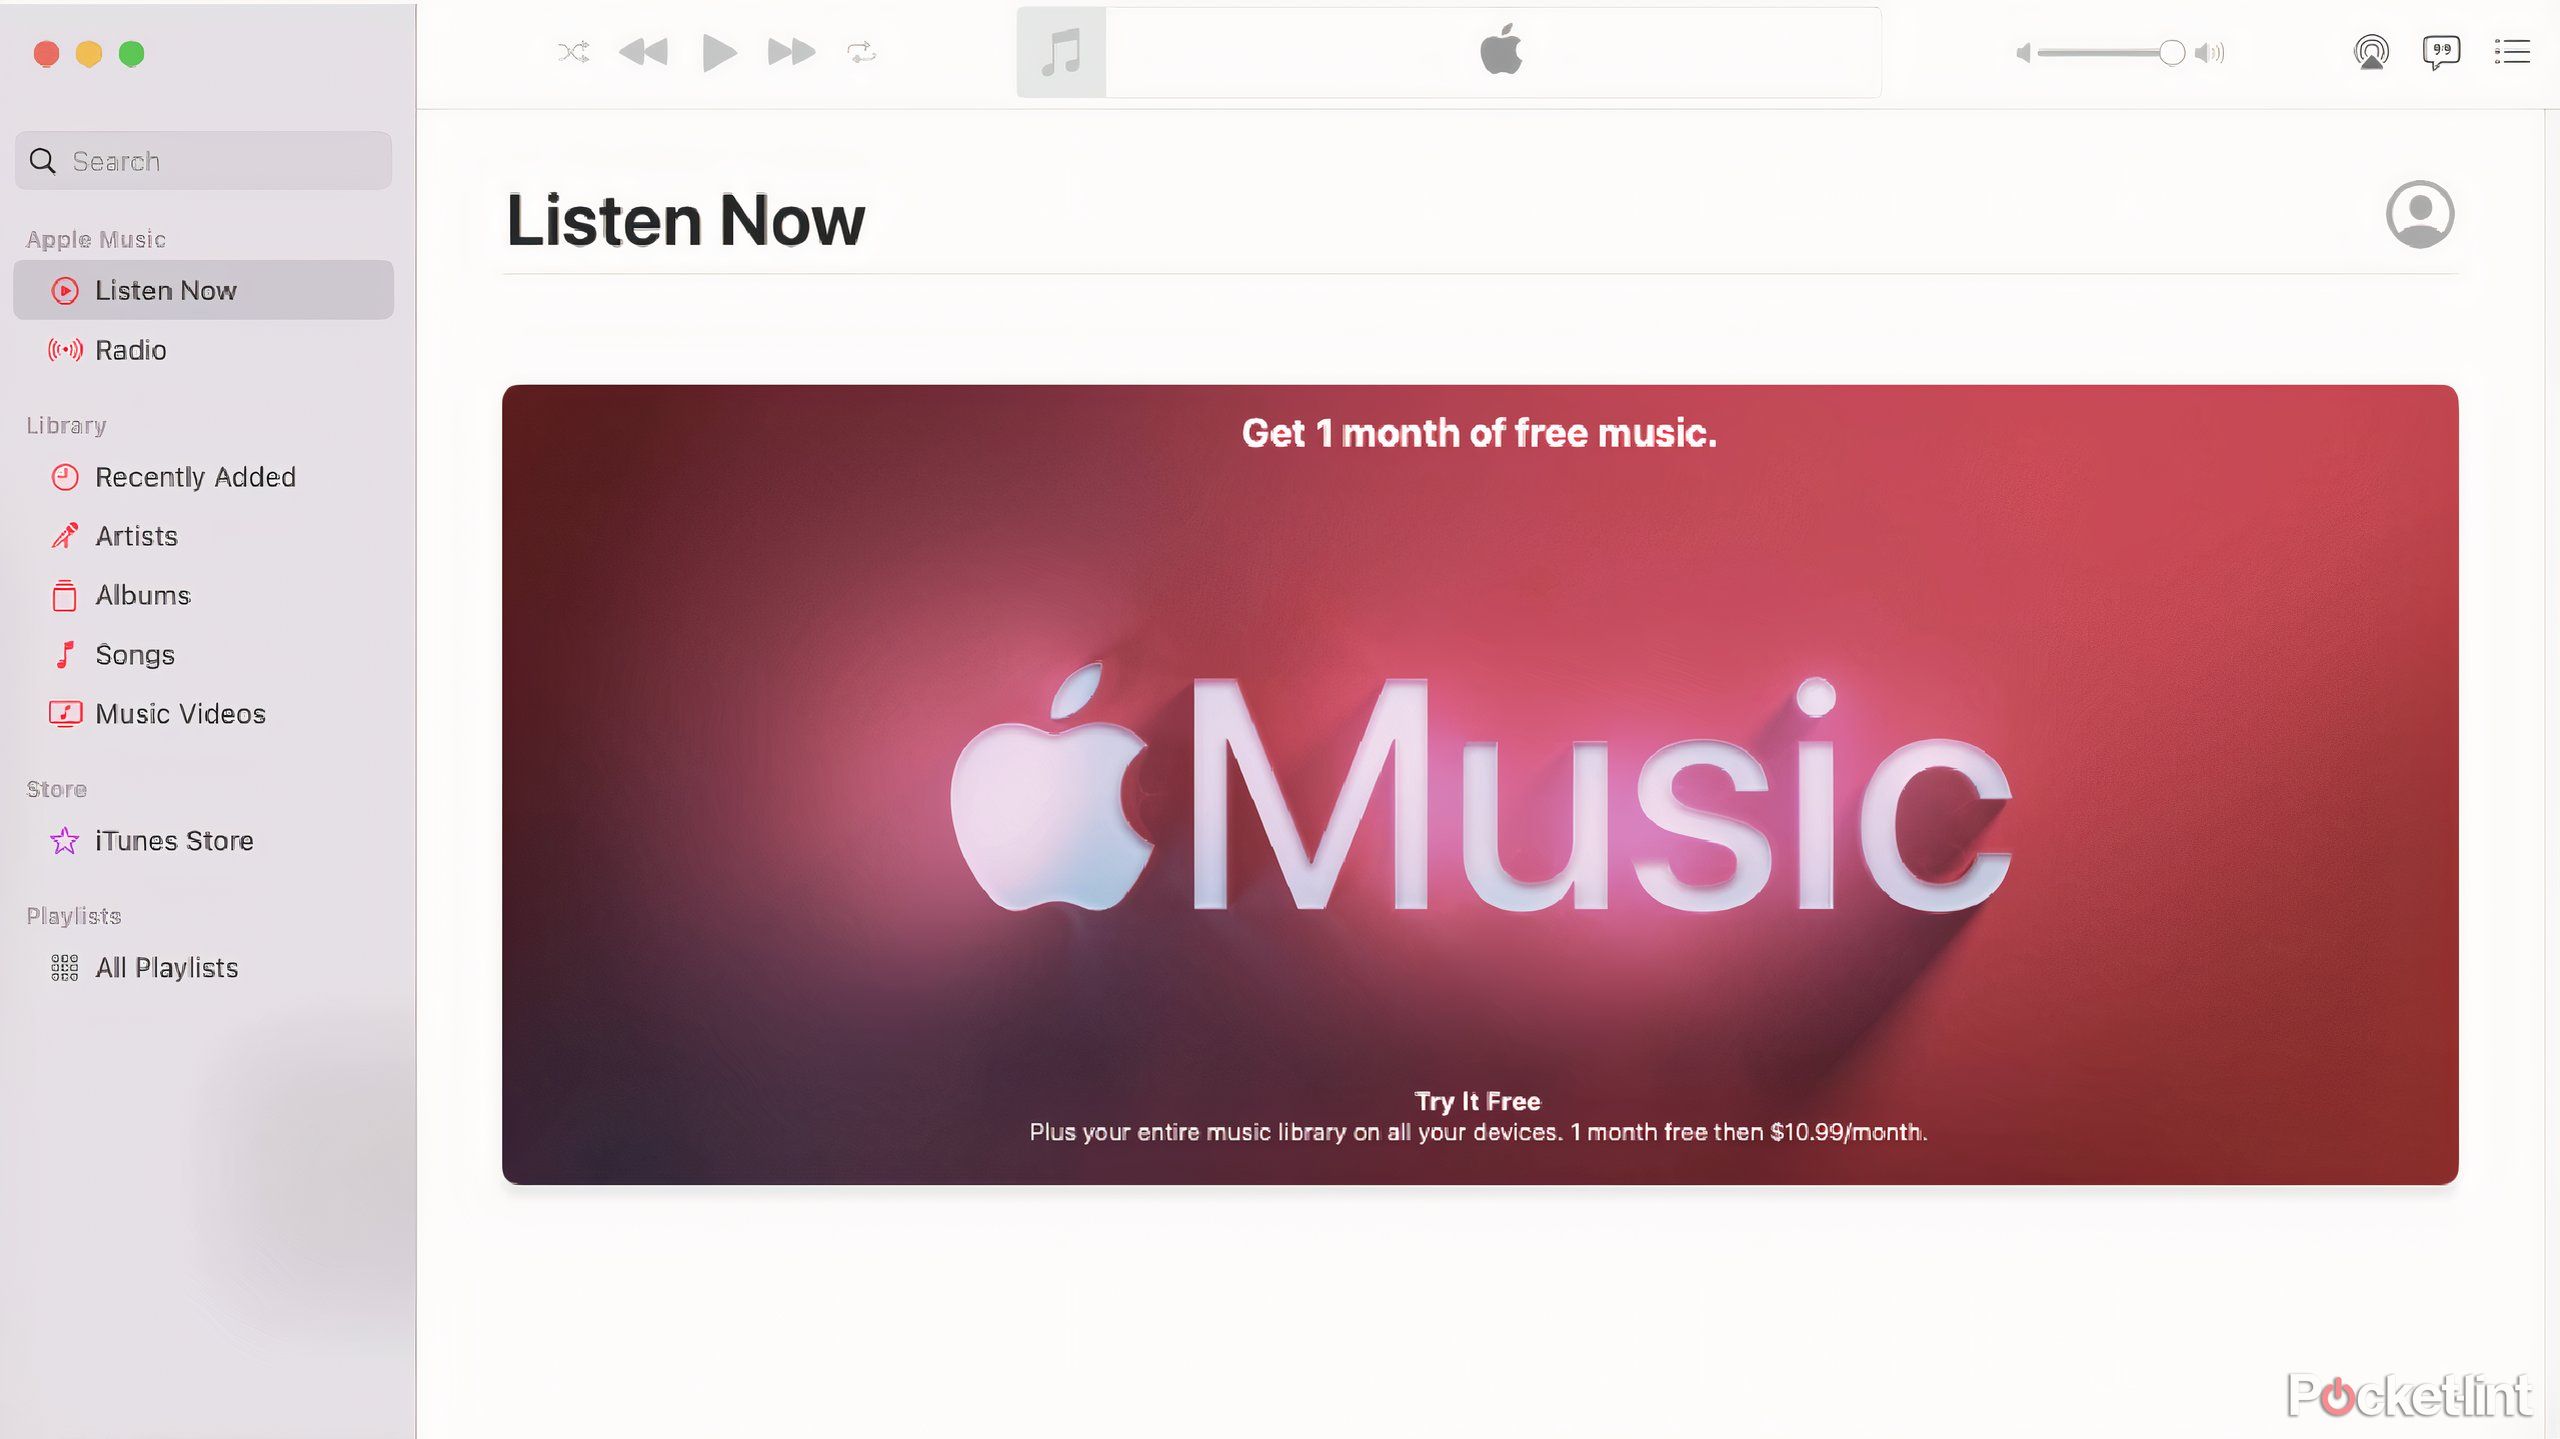 Apple Music Promotion 1 month free